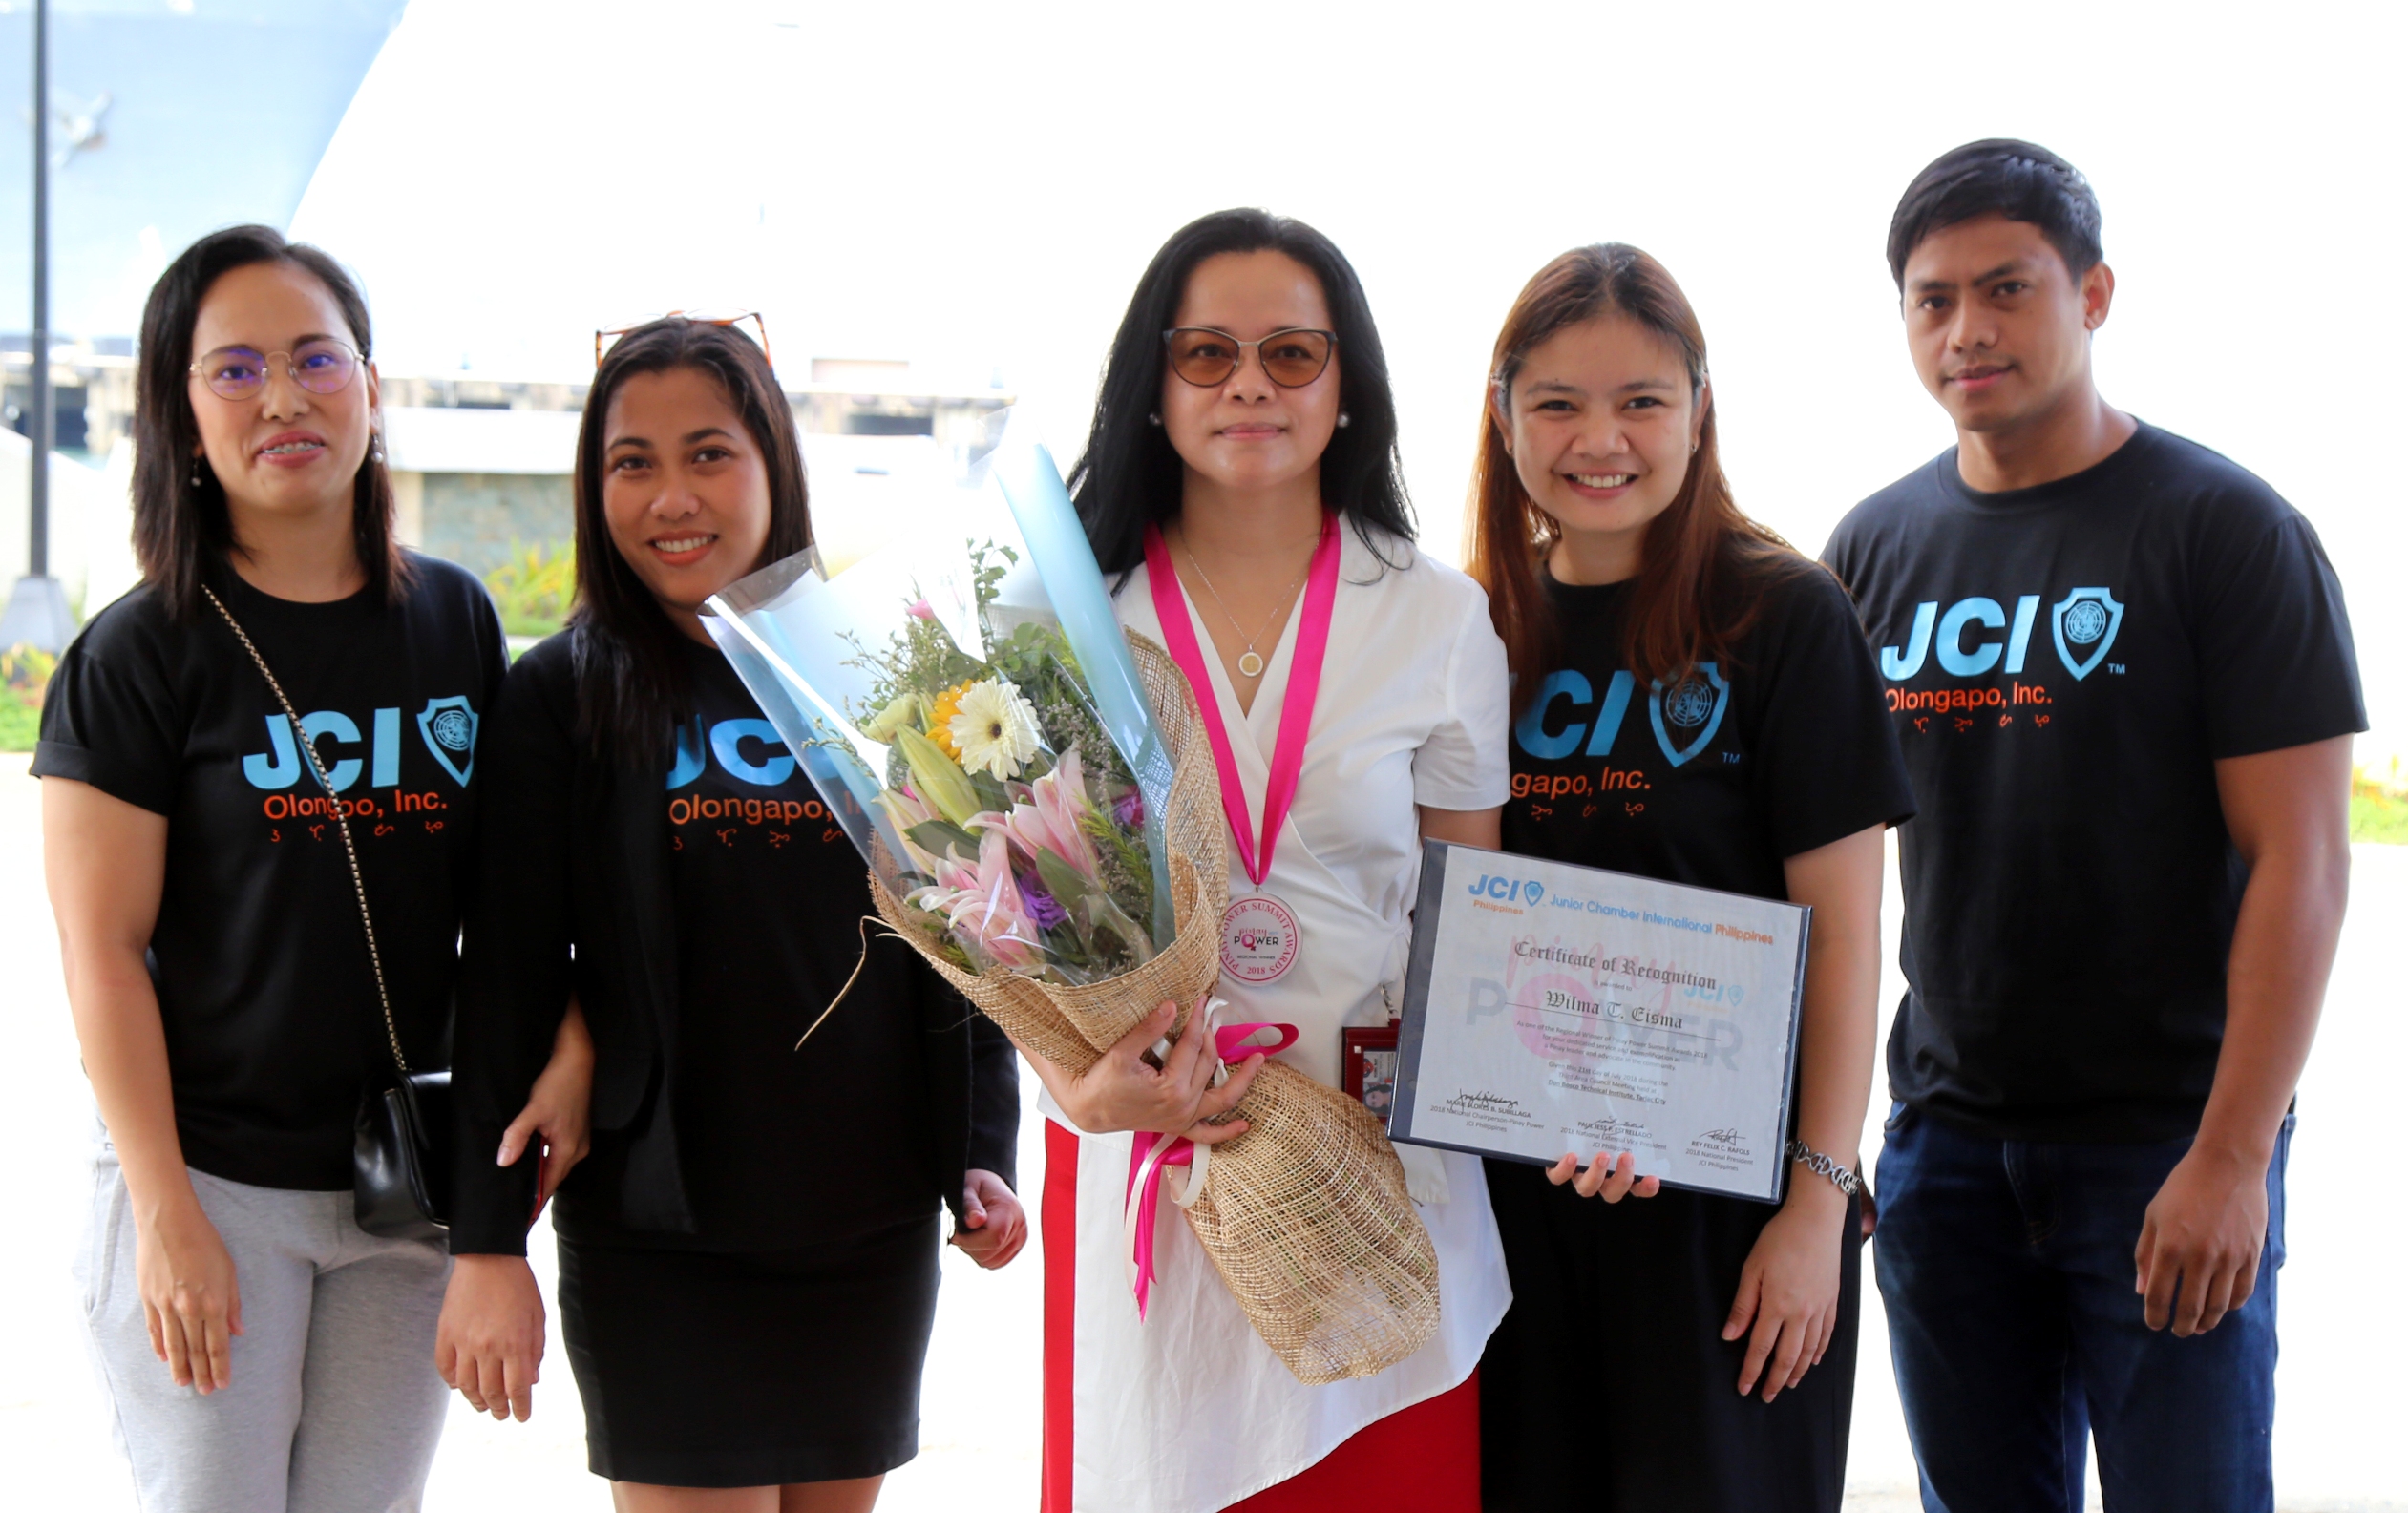 SBMA Chairman and Administrator Wilma T. Eisma (center) receives her certificate of recognition as JCI â€˜Pinay Powerâ€™ awardee for Region 3 from (L-R): JCI Olongapo VP for Community  Ruth Devillena, VP for Business Jen Angeles, JCI Olongapo President Almira Zapanta, and John Ceperes.